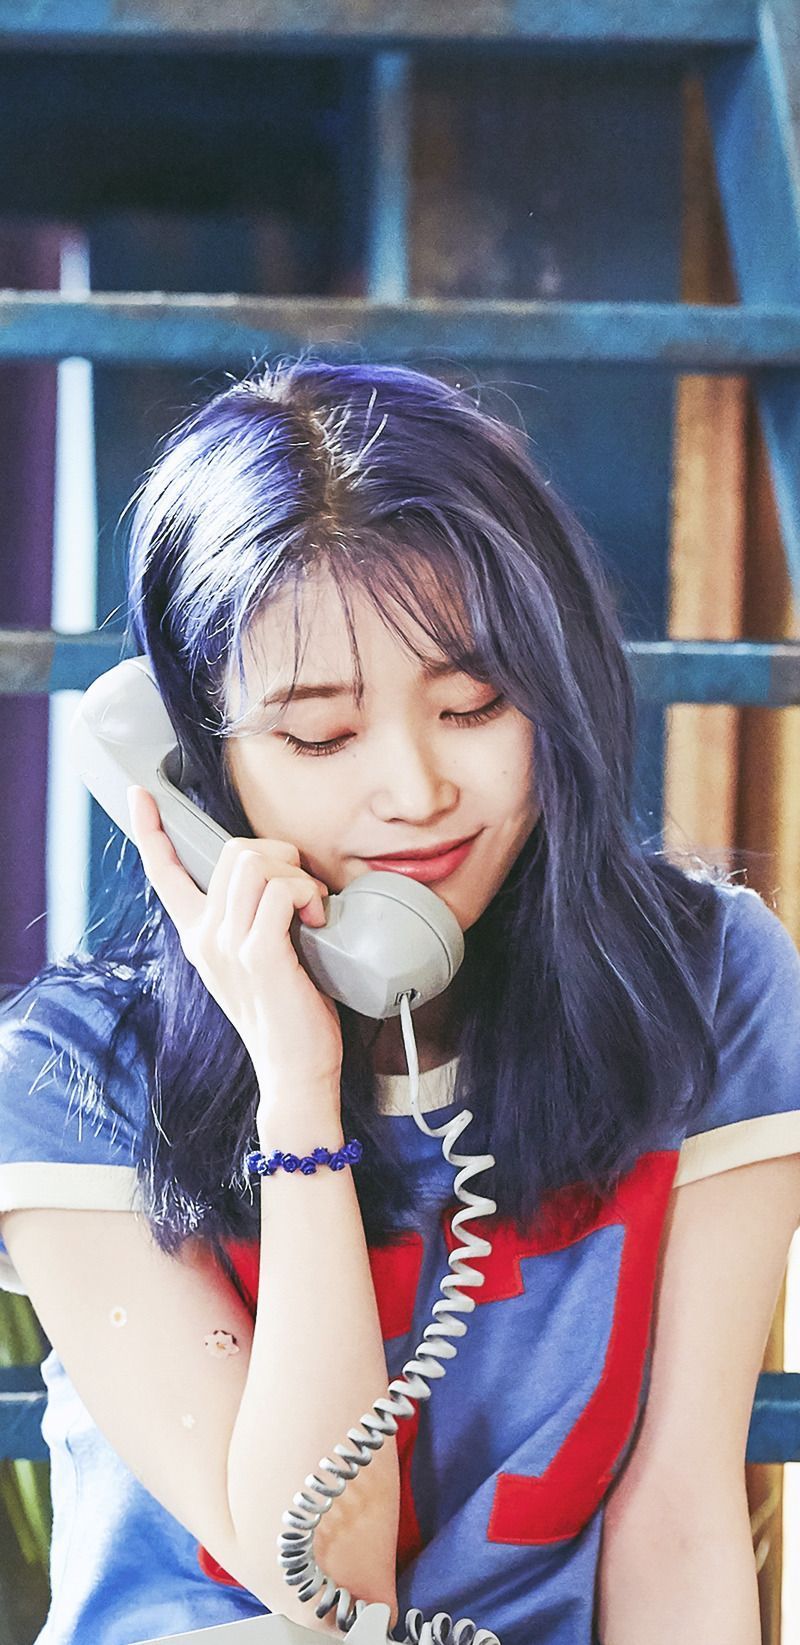 IU Blueming (Bloomington) behind the background of the phone lock